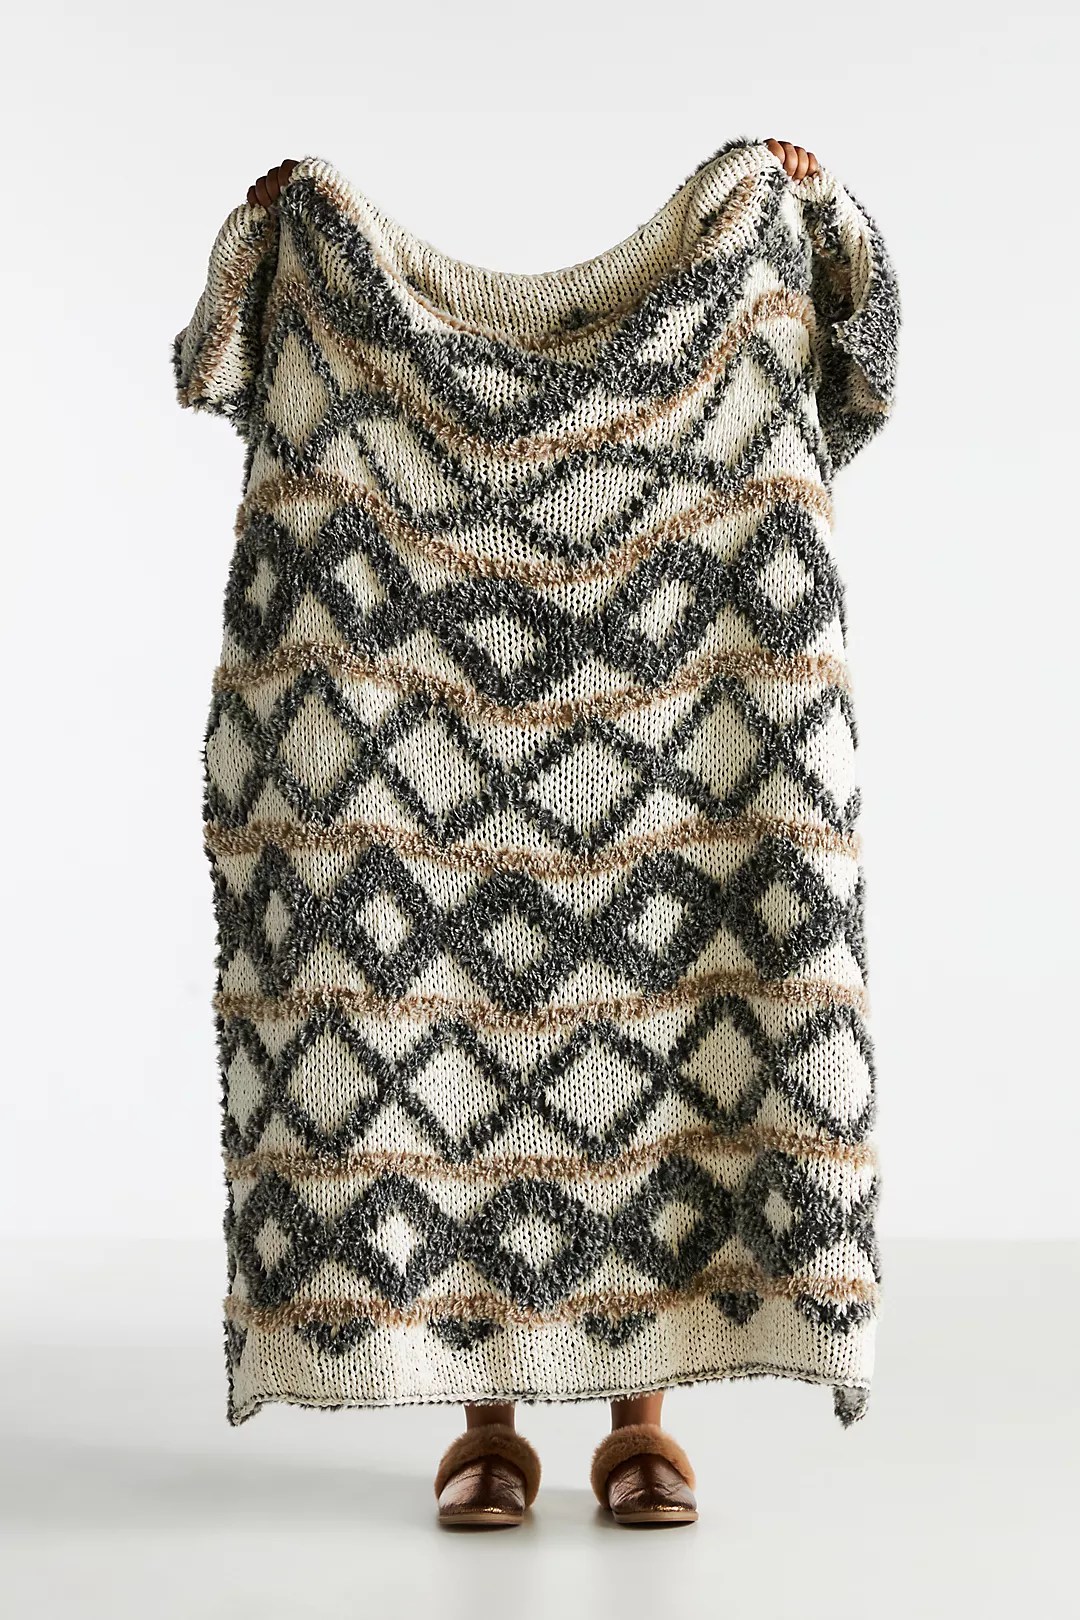 person holding up the georgie cozy knit throw blanket from the anthropologie black friday sale